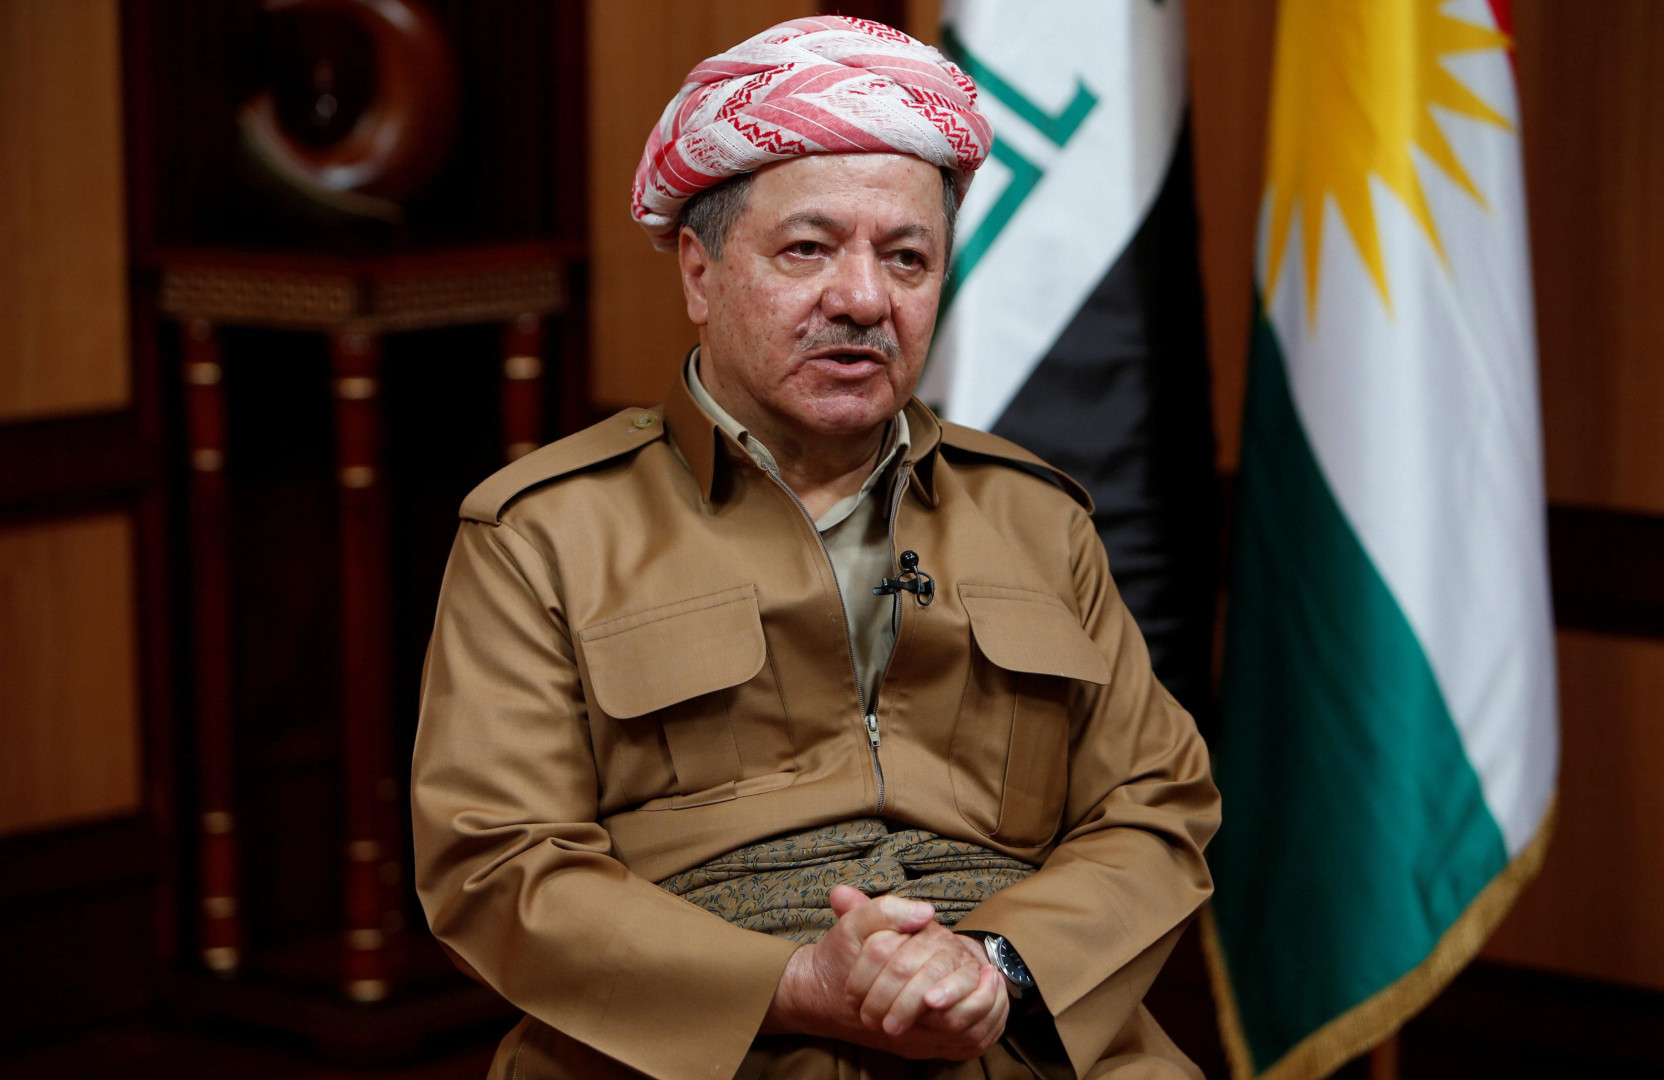 Masoud Barzani: the experience of the Kurdistan region may not be successful in other countries